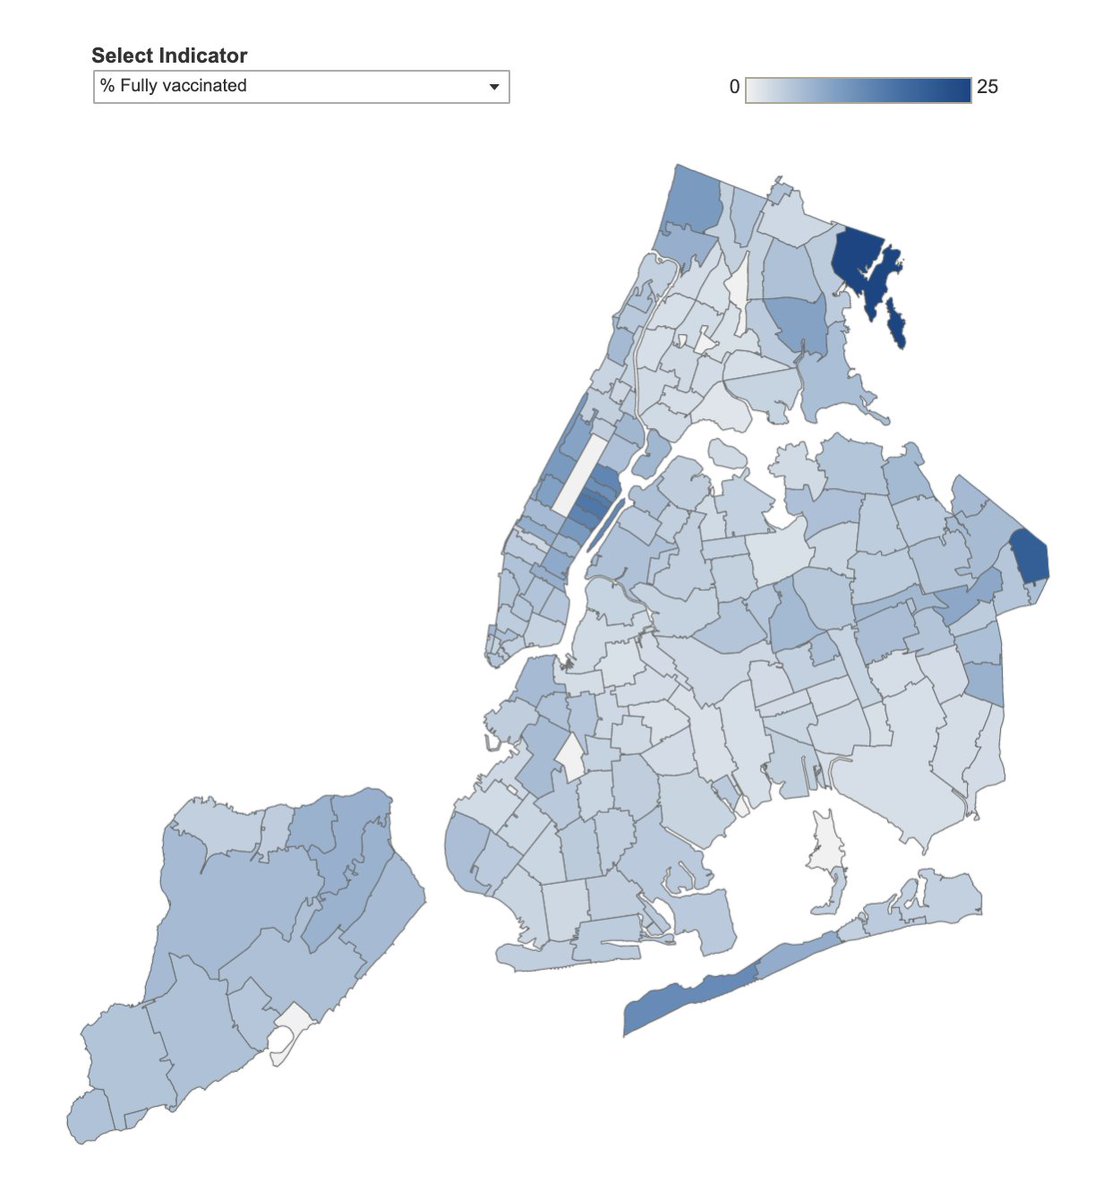 BREAKING: NYC releases, for first time, data on vax rates by zip code. In wealthy, whiter areas, 16% of adults have been fully vax'd. In low-income neighbs of color, as low as 2%. Map on left is covid fatality rate. On right is vax rate. This is upside down. It can not stand.